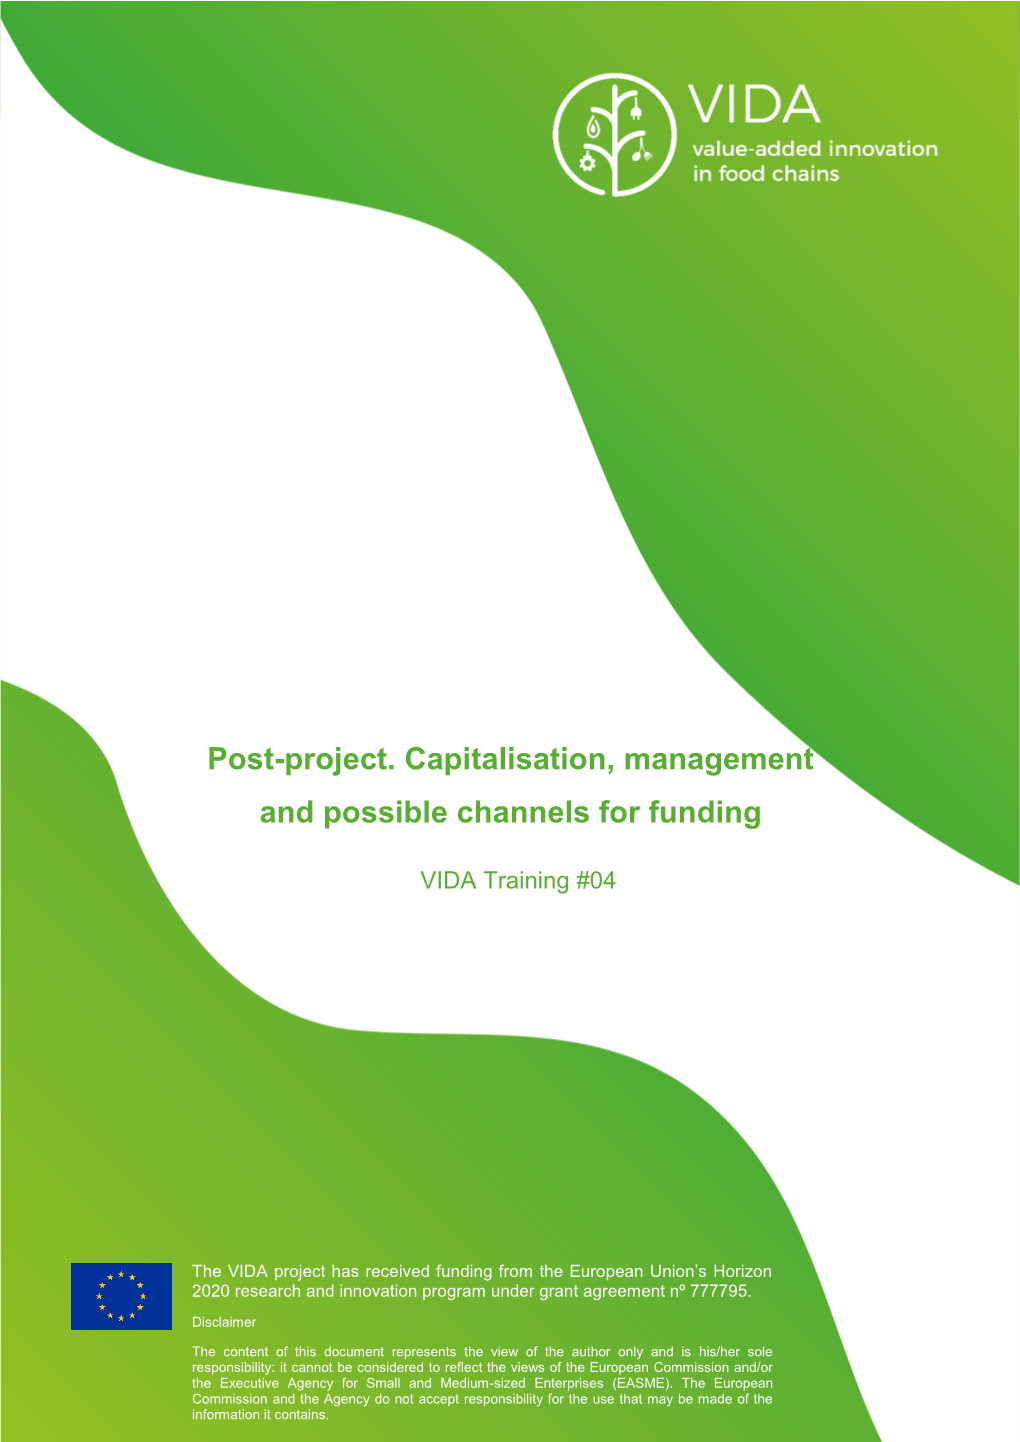 Post-Project. Capitalisation, Management and Possible Channels for Funding